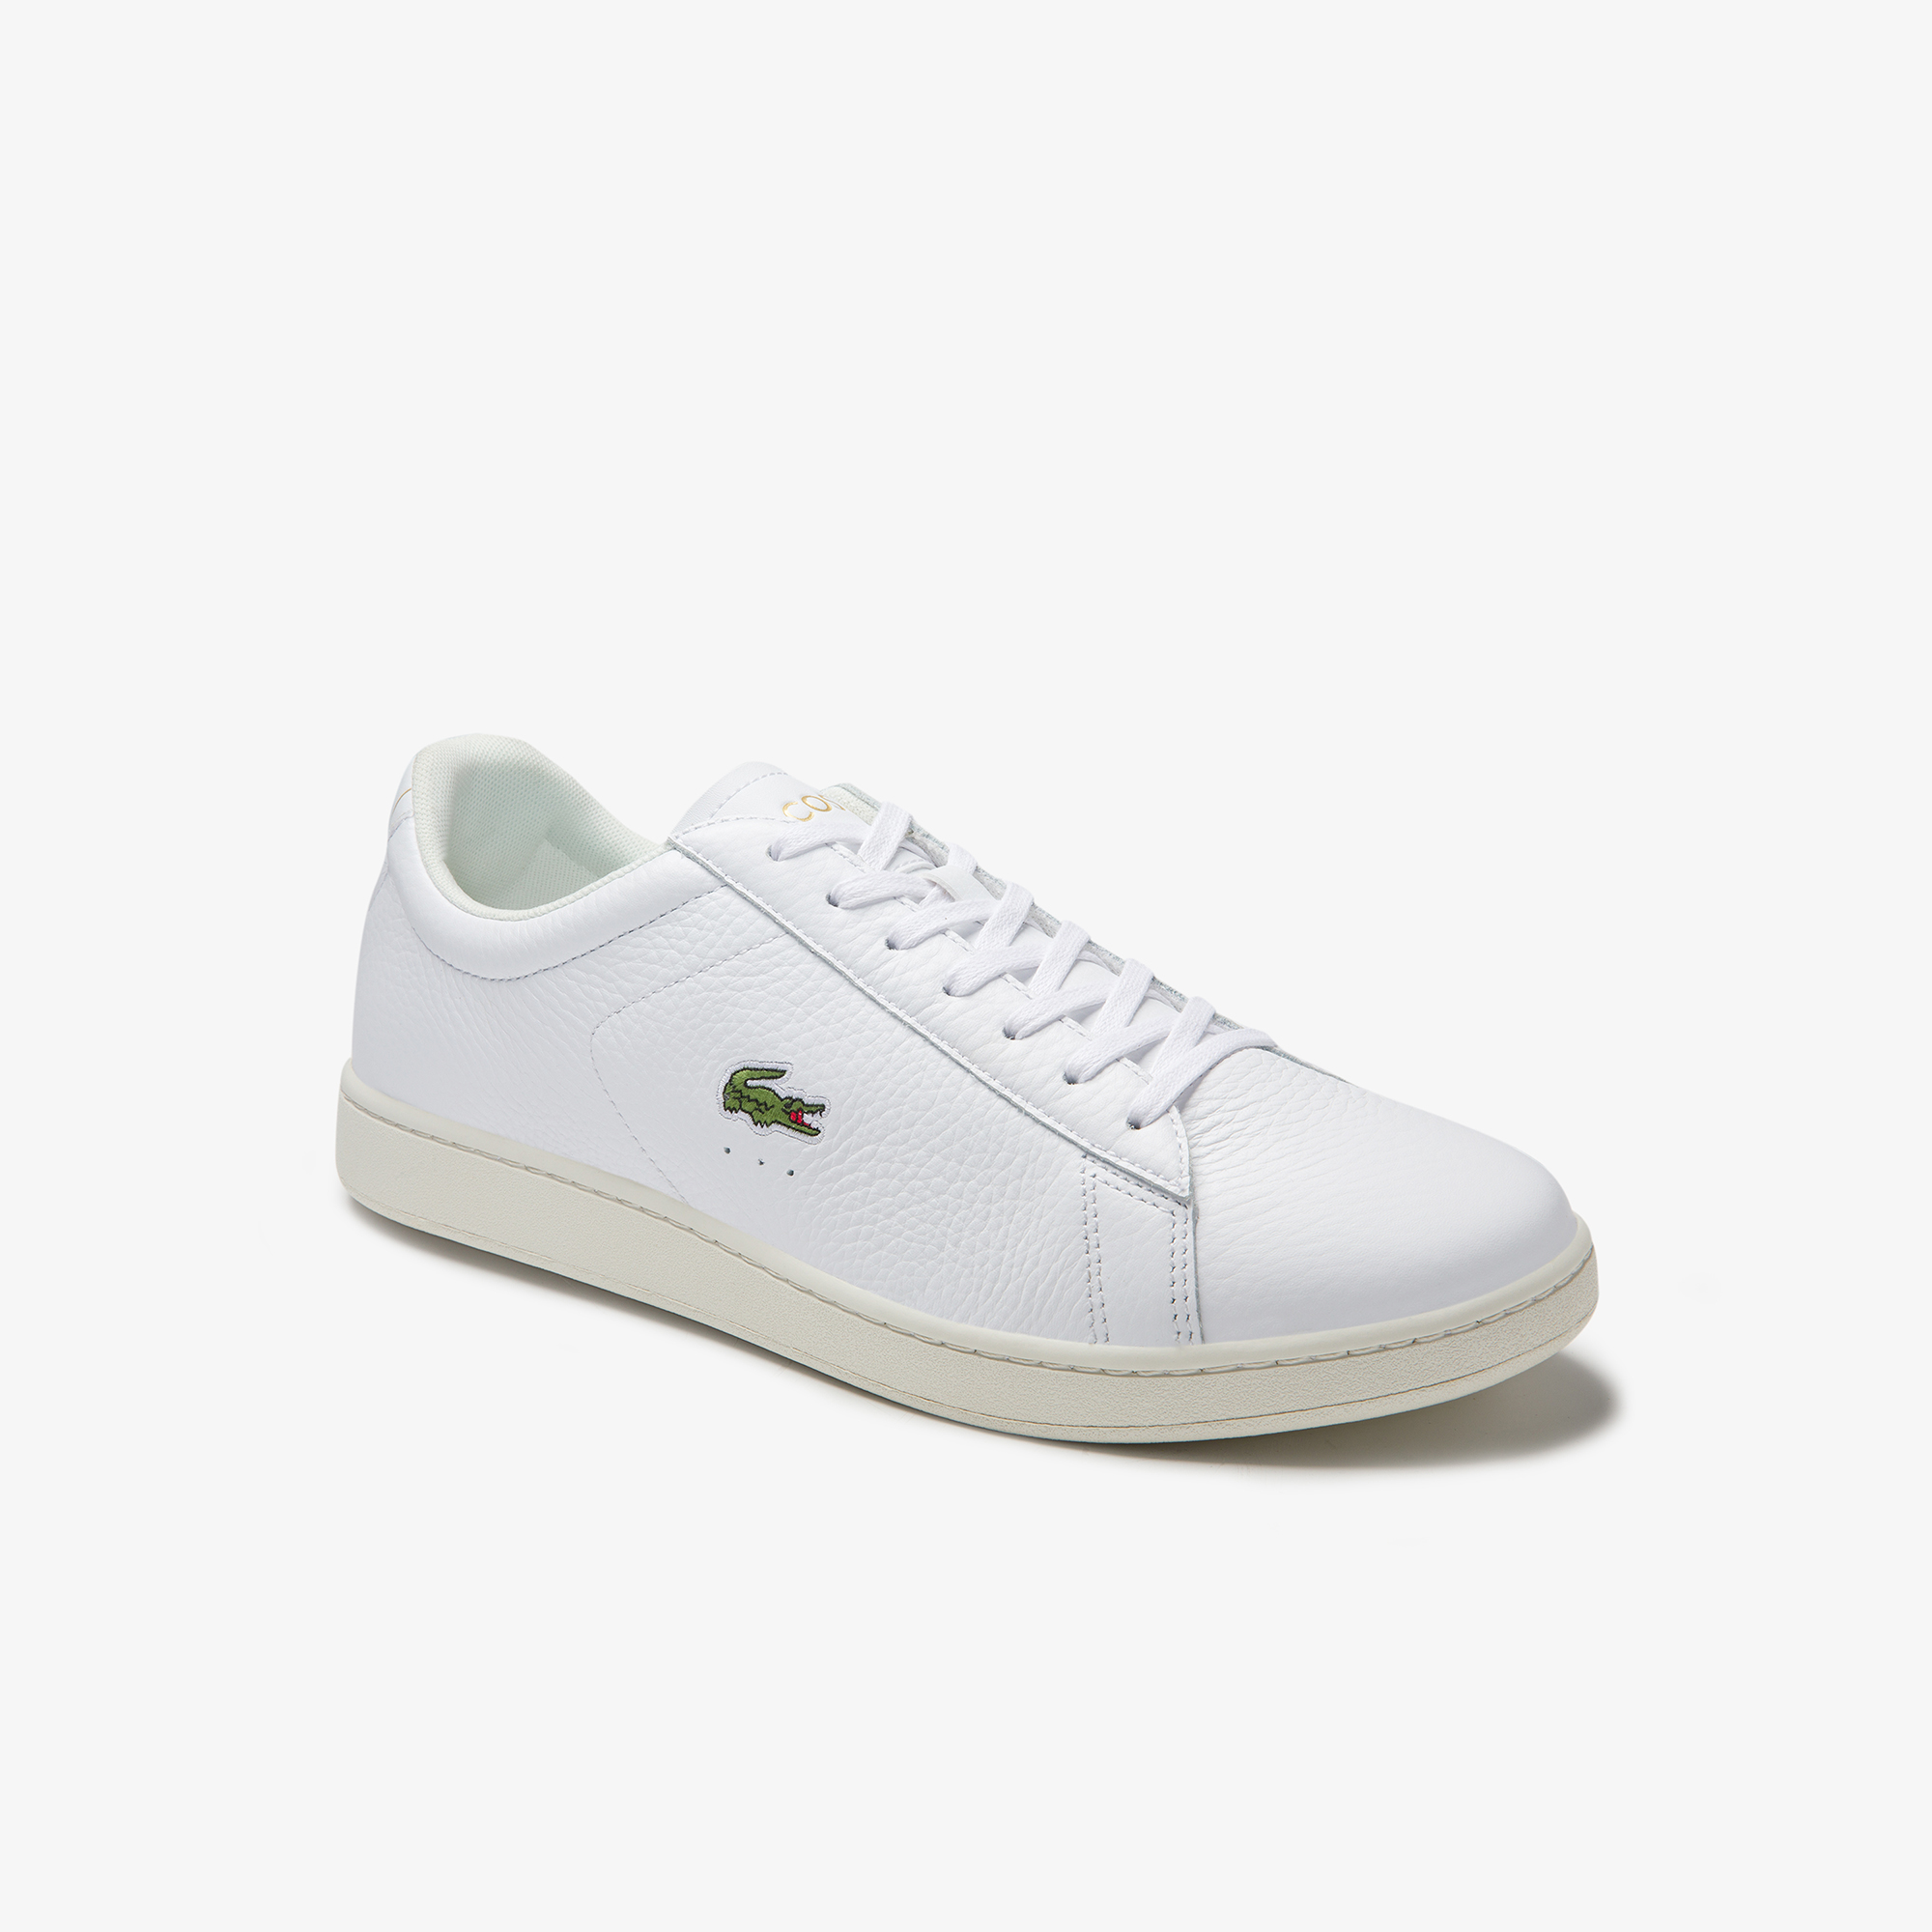 Lacoste Men's Carnaby Evo Tumbled 